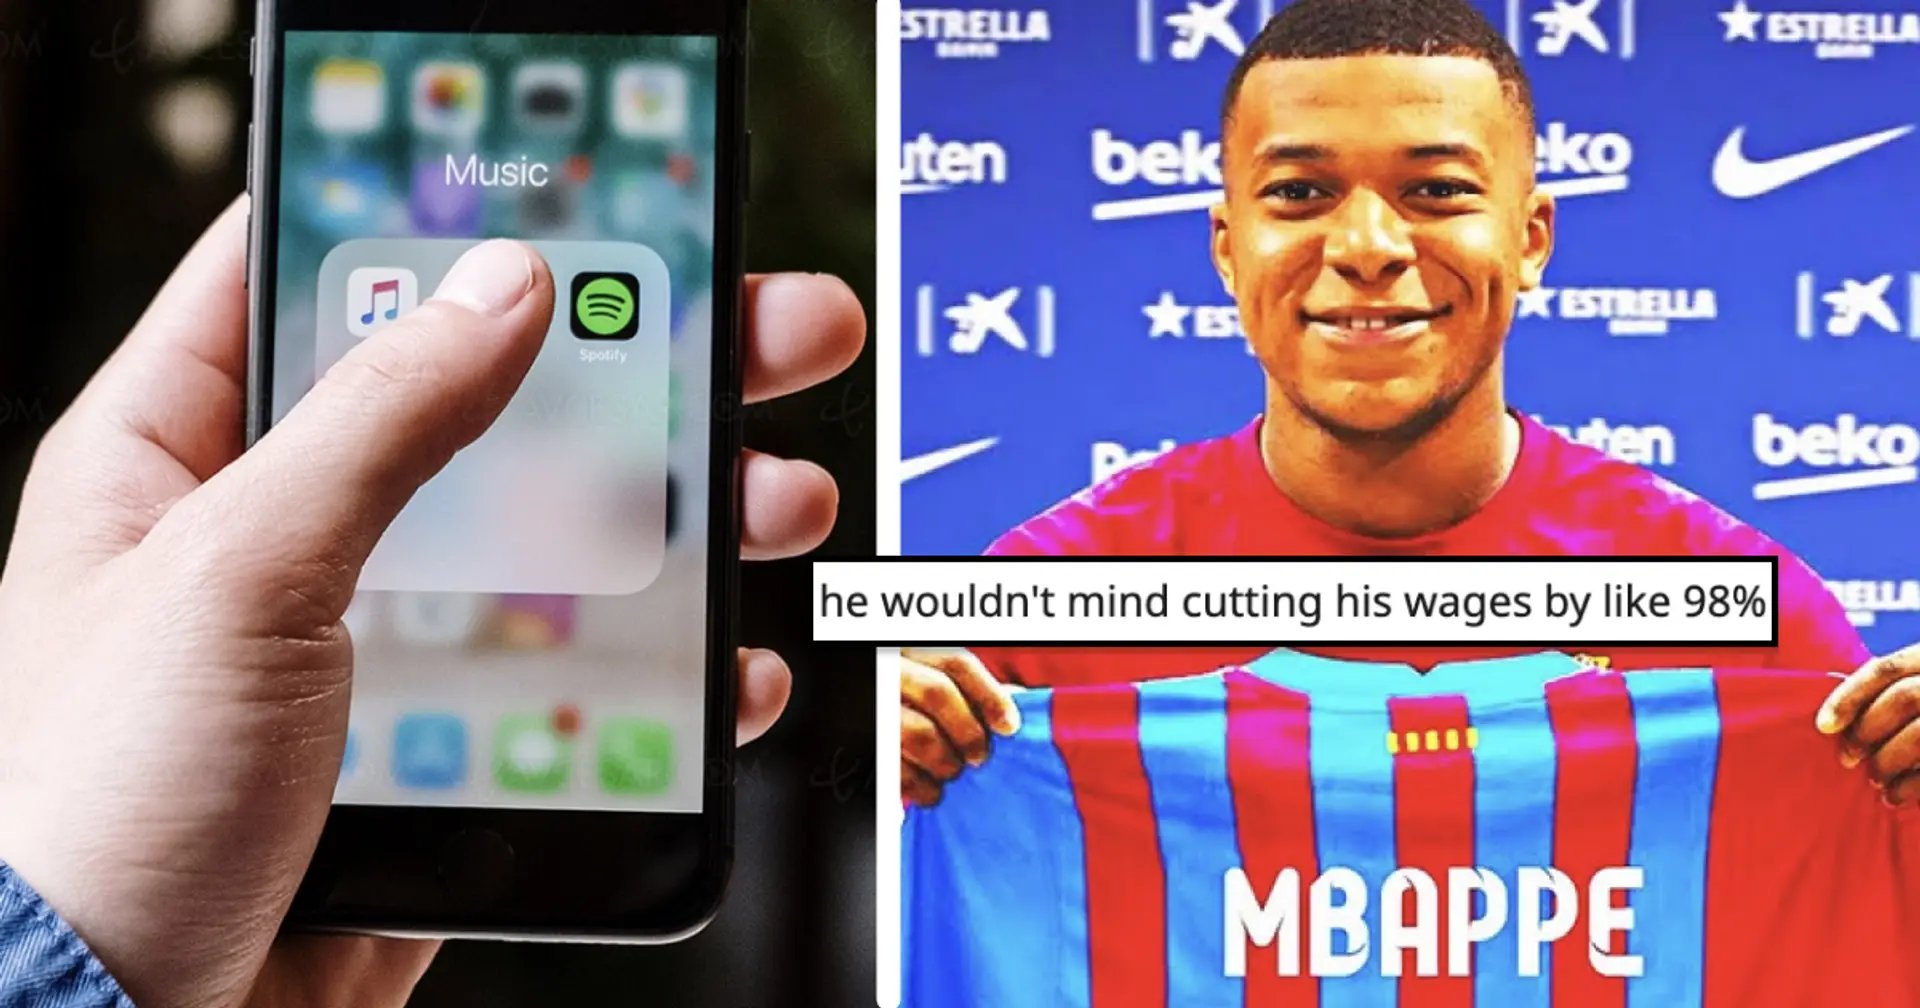 'We offer Marcos Alonso and a 3-month Spotify subscription': Cules react to sudden Mbappe links